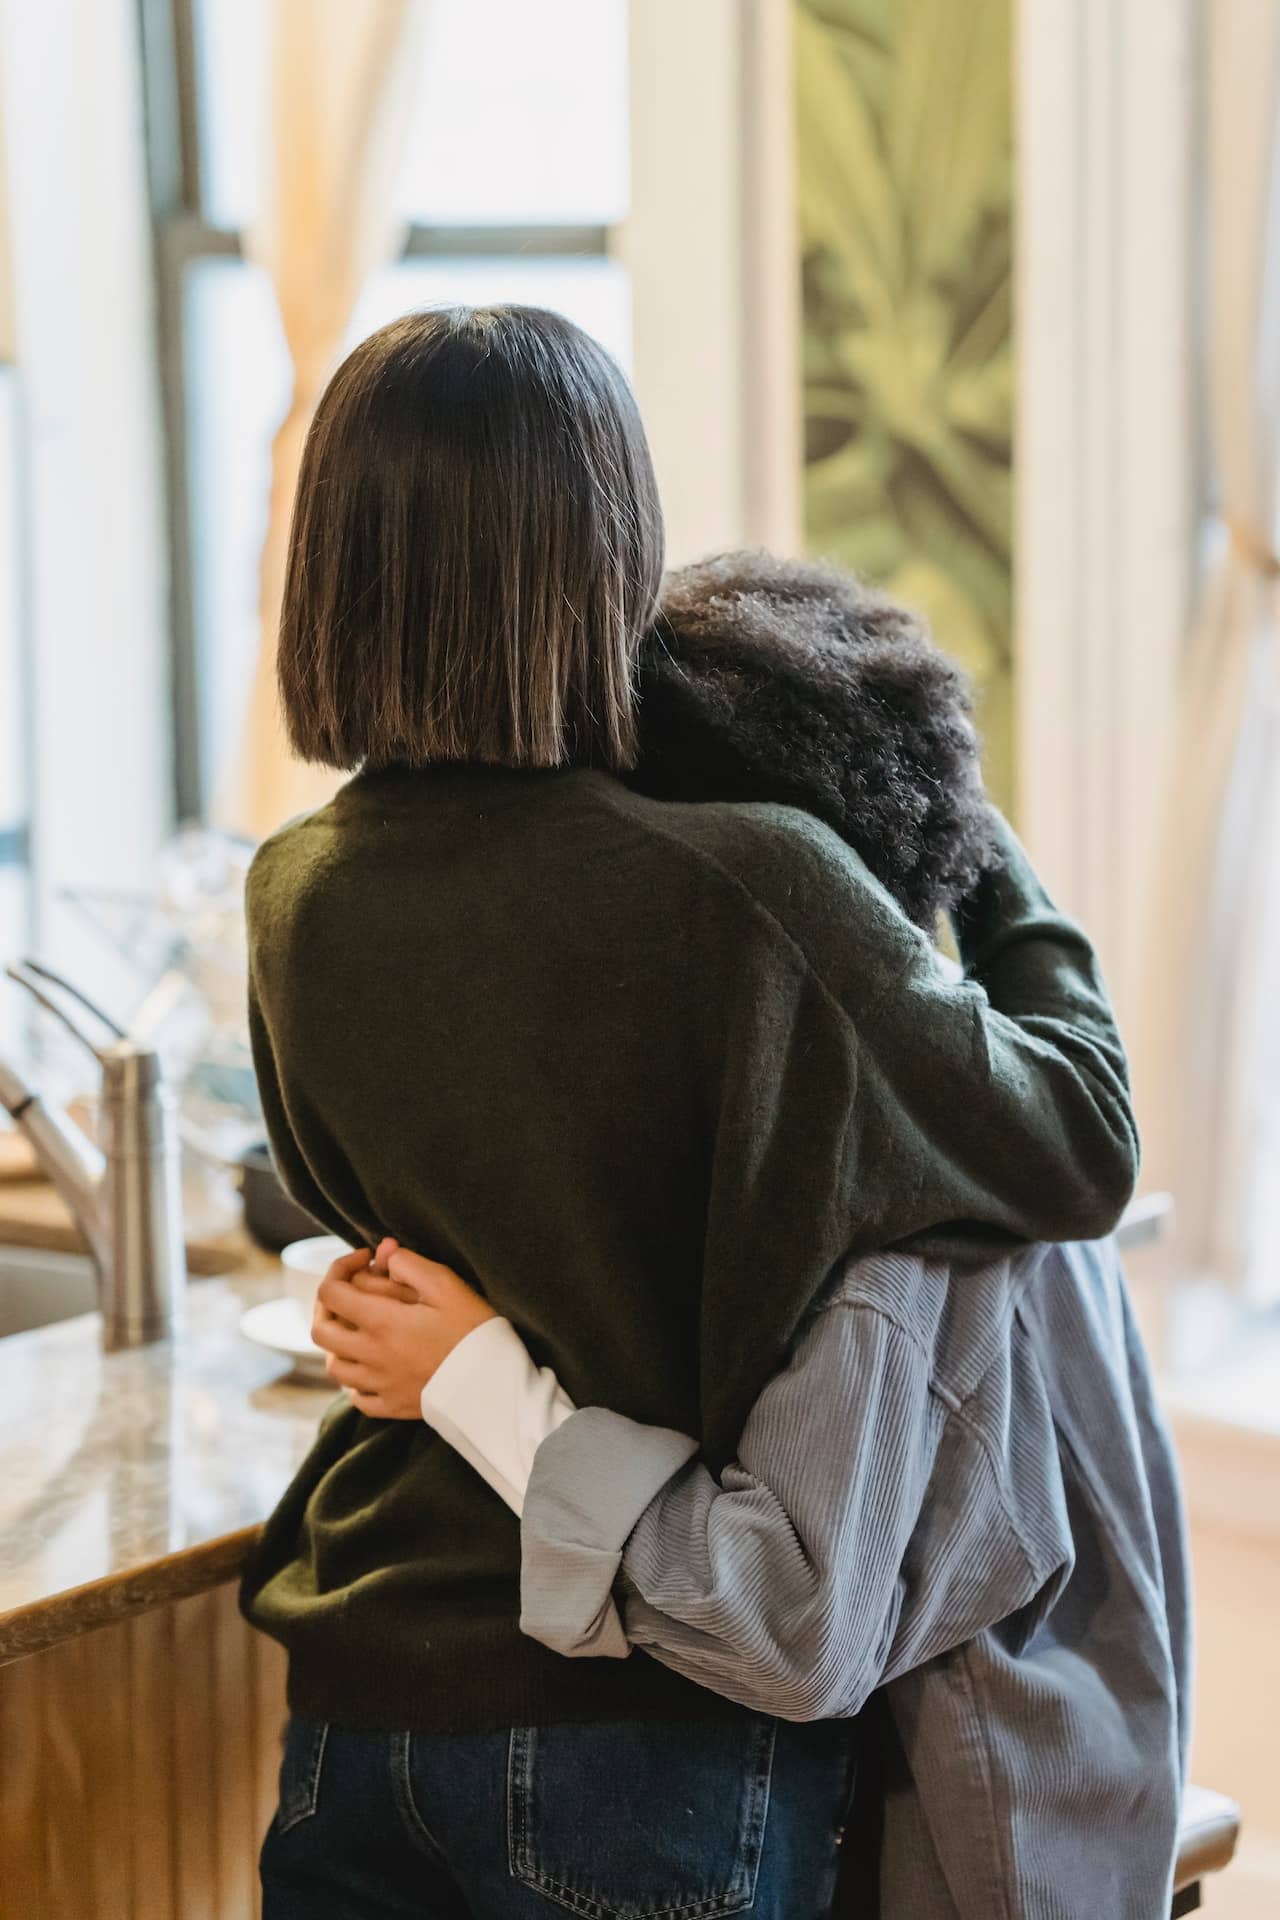 Stock photo of two people hugging from behind, one with a short straight bob, one with an afro hairstyle. They appear to be supporting each other.